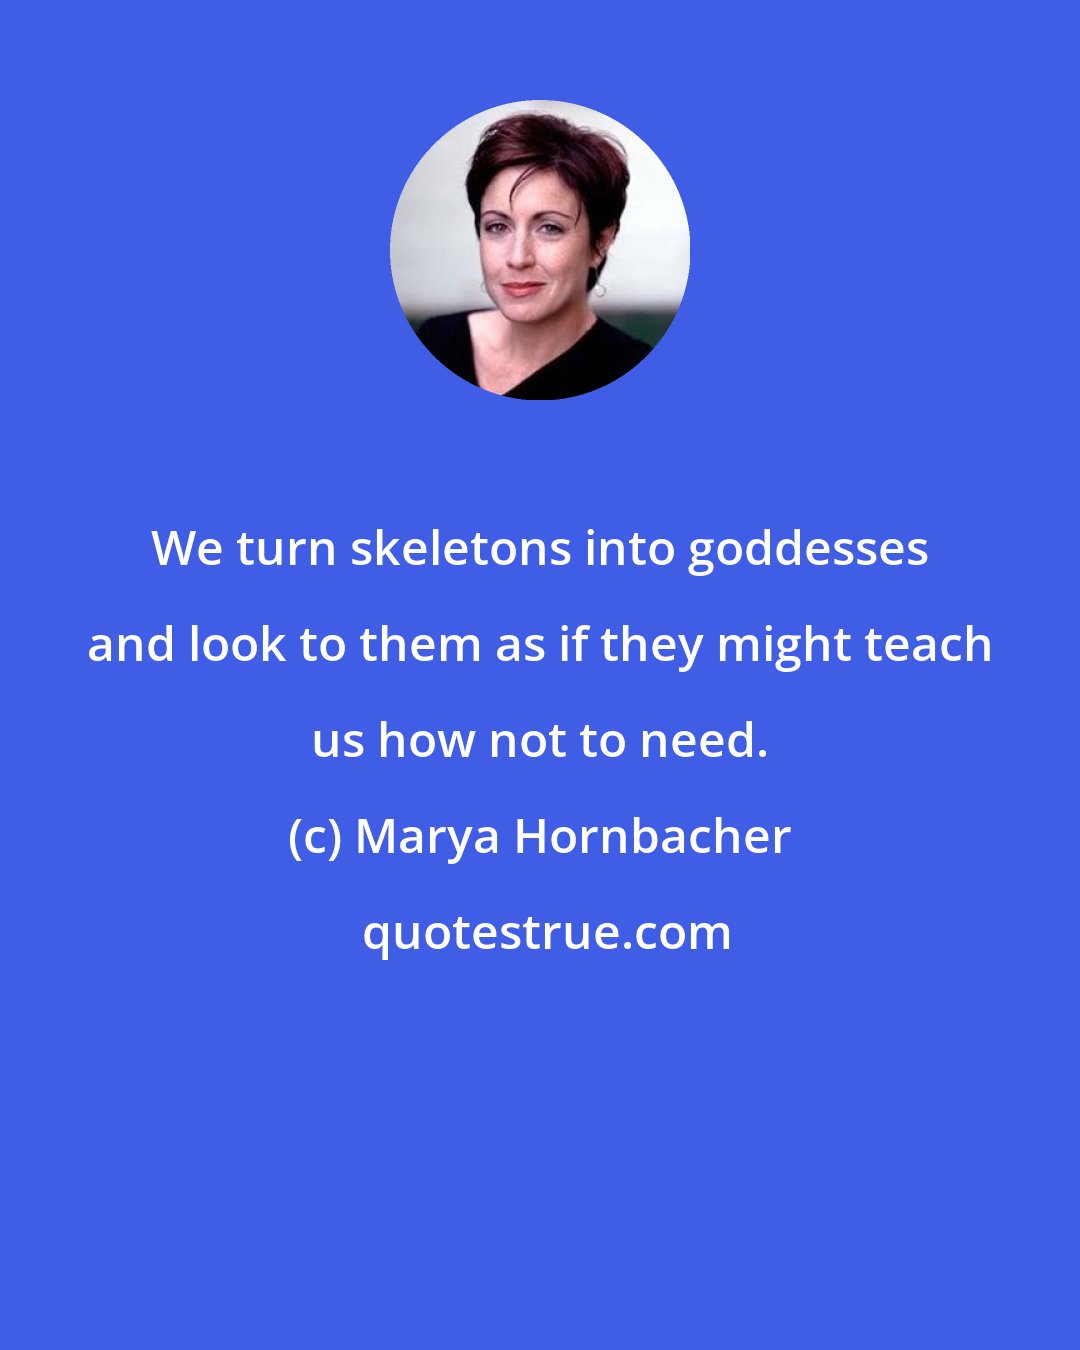 Marya Hornbacher: We turn skeletons into goddesses and look to them as if they might teach us how not to need.